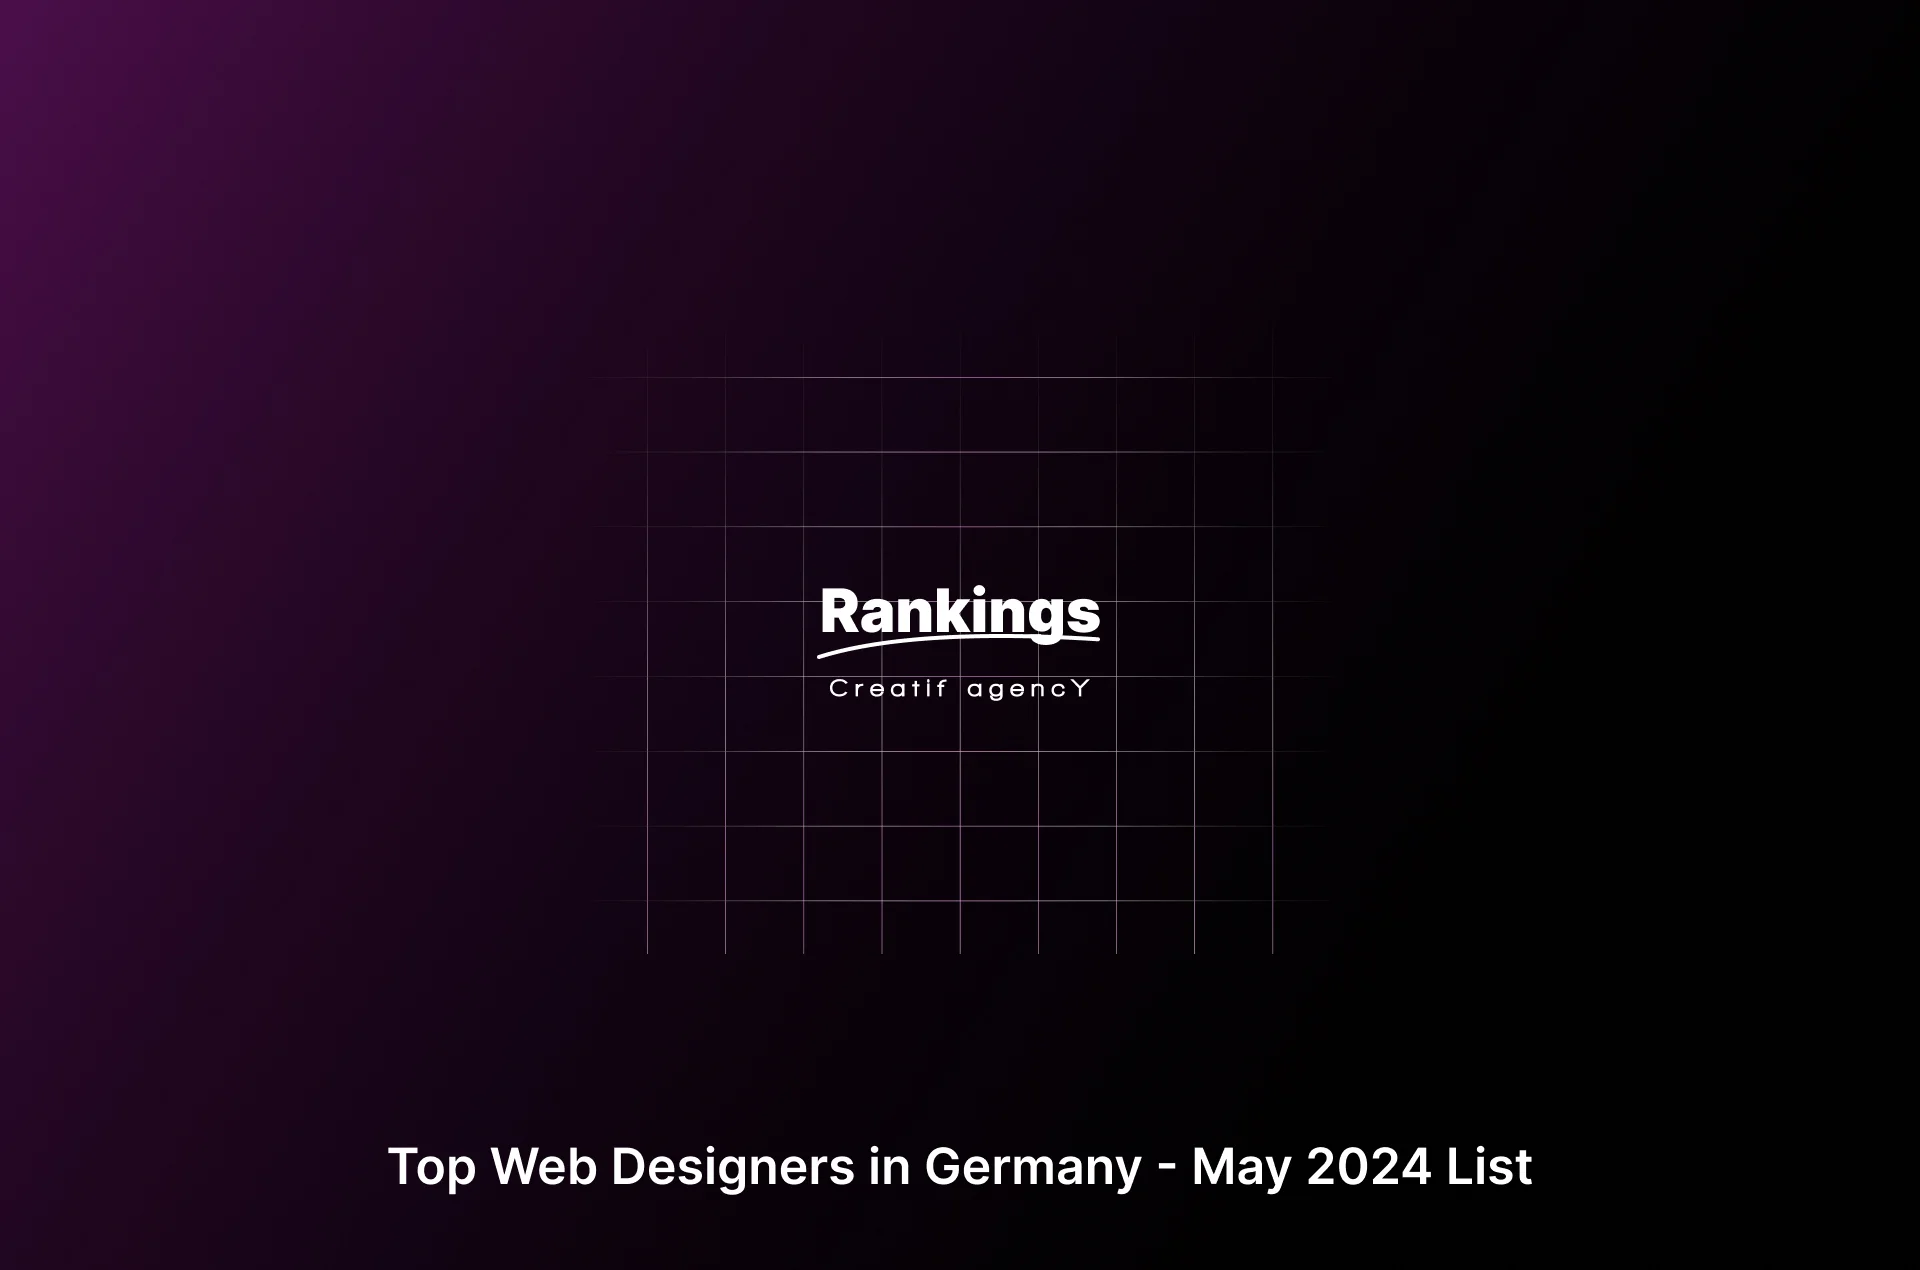 Top Web Designers in Germany - May 2024 List